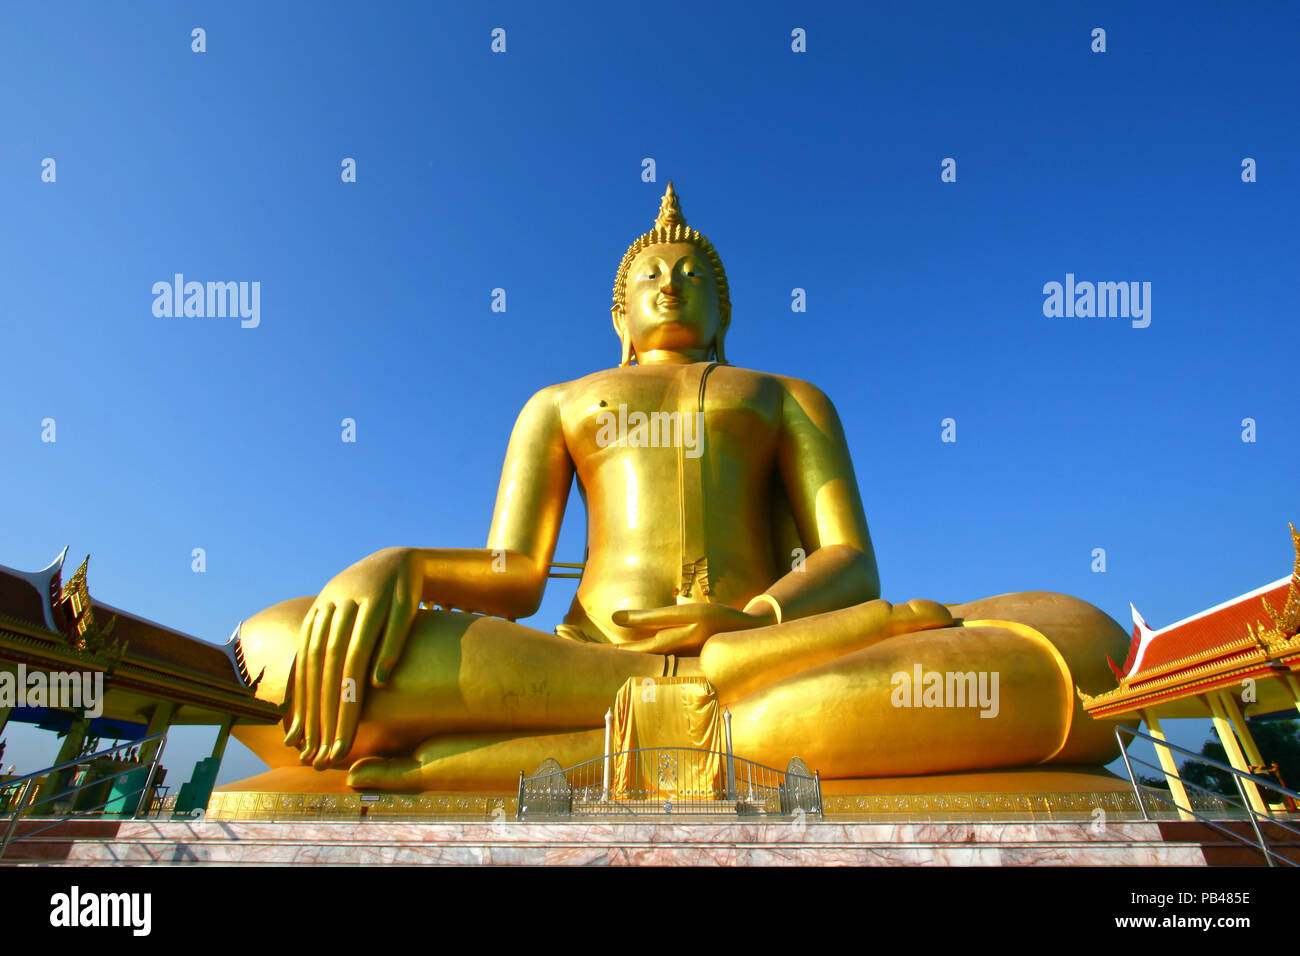 big golden Buddha statue with a blue sky, Thailand Stock Photo